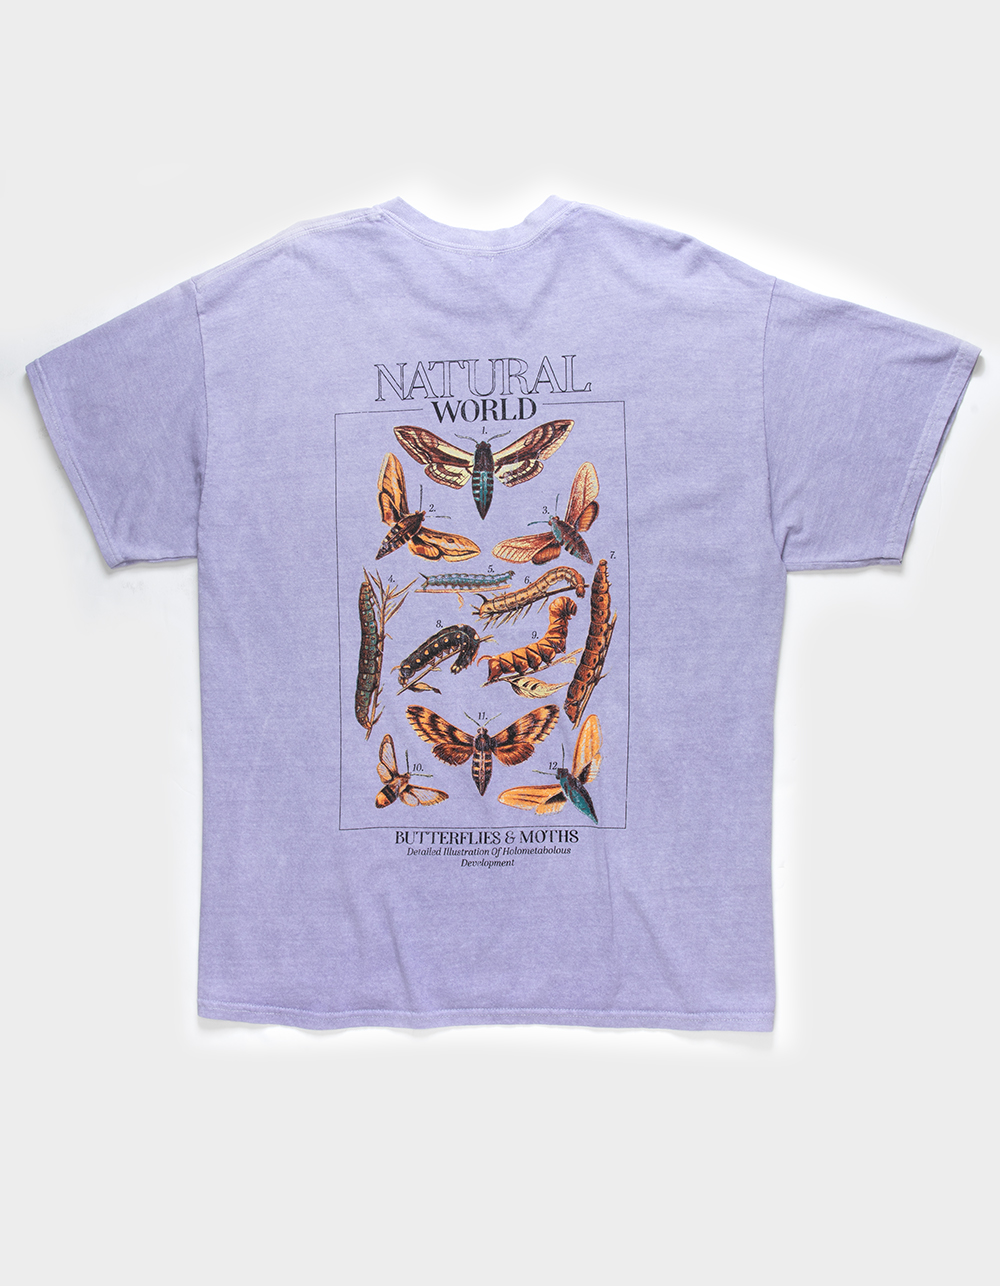 BDG Urban Outfitters T-Shirts and Graphic Tees for Young Adult Men